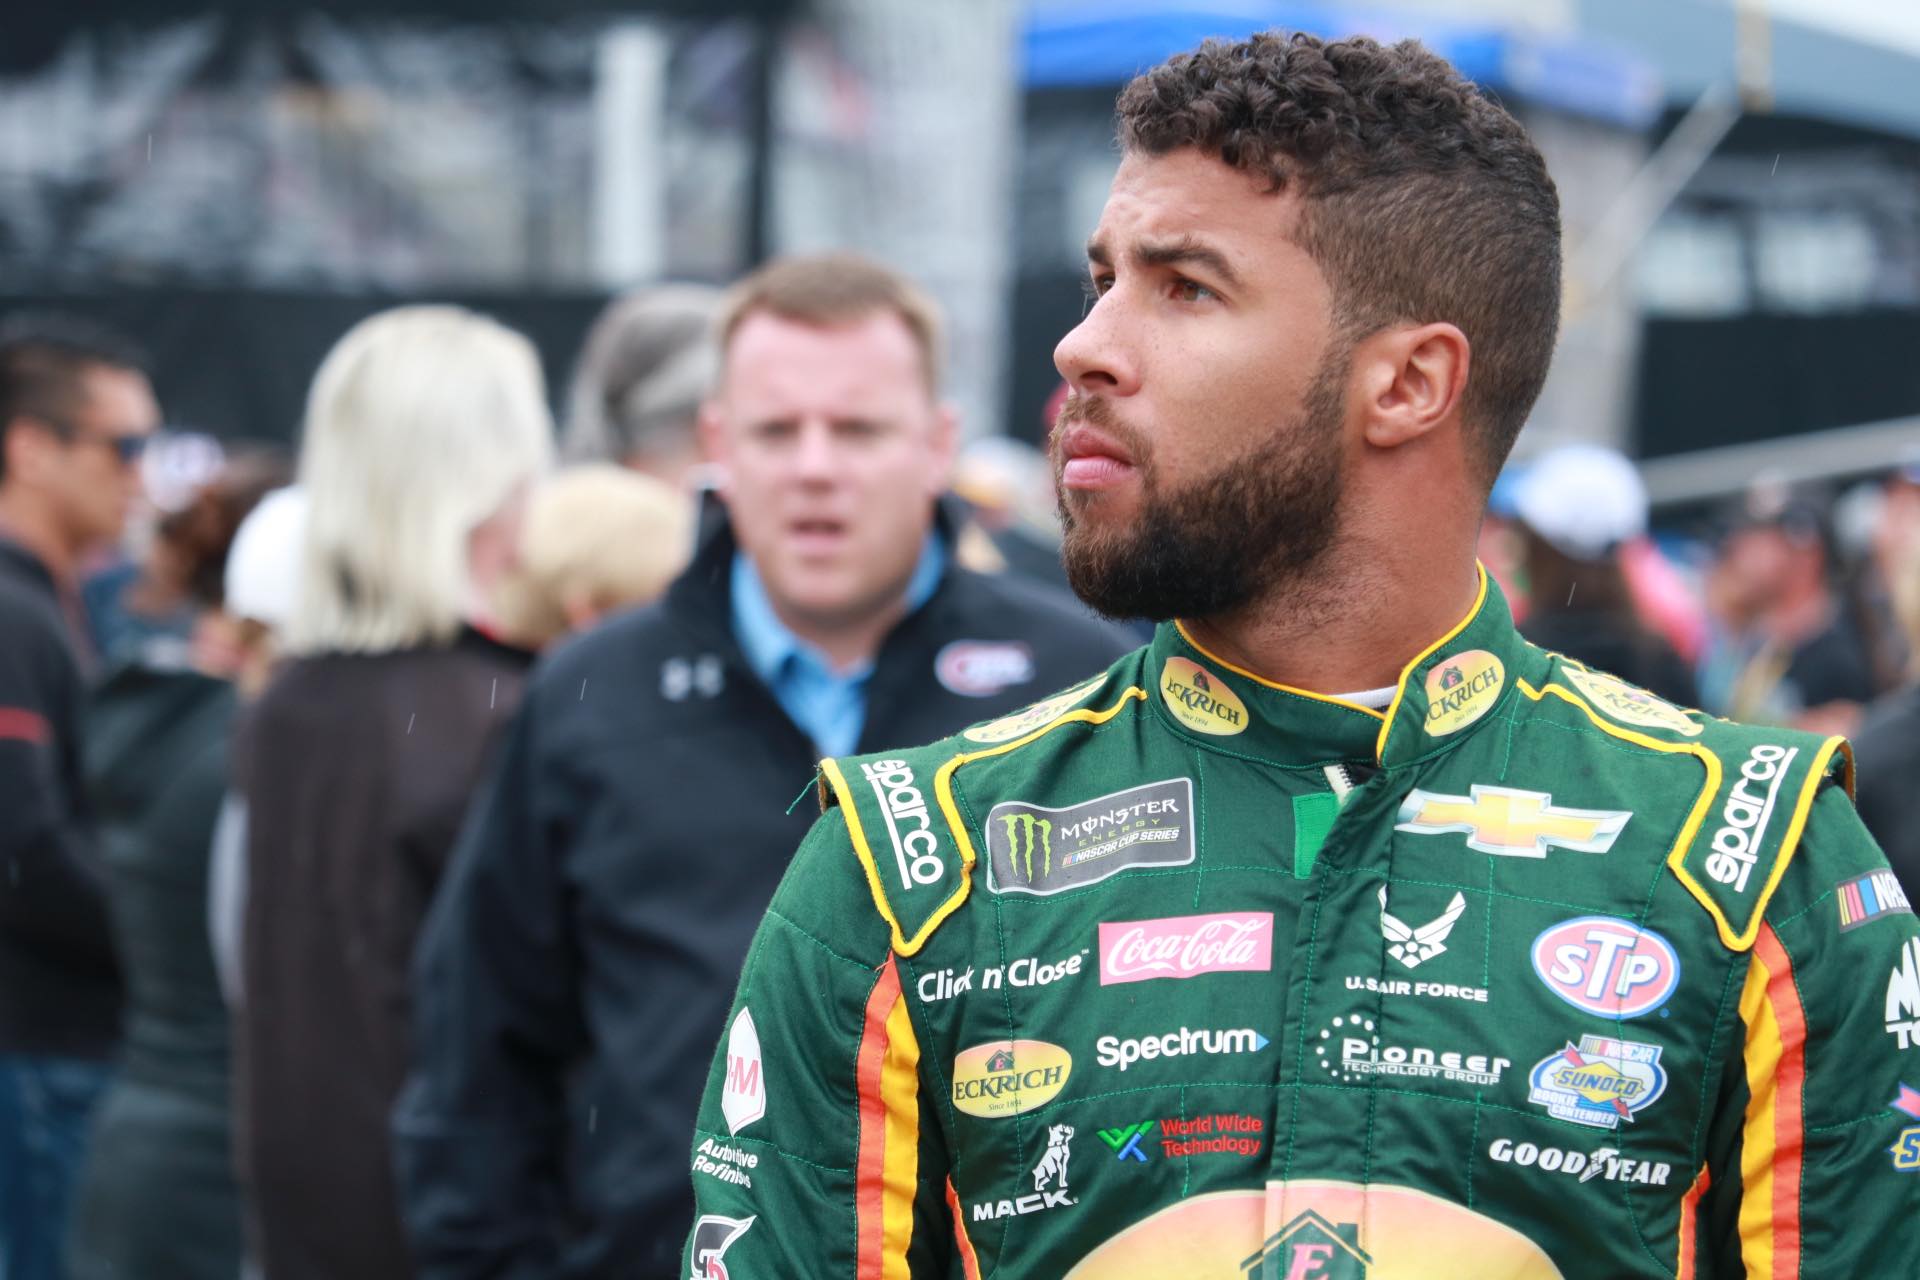 Did Bubba Wallace have another promising race at Chicagoland? (Photo Credit: Kathleen Cassidy/TPF)